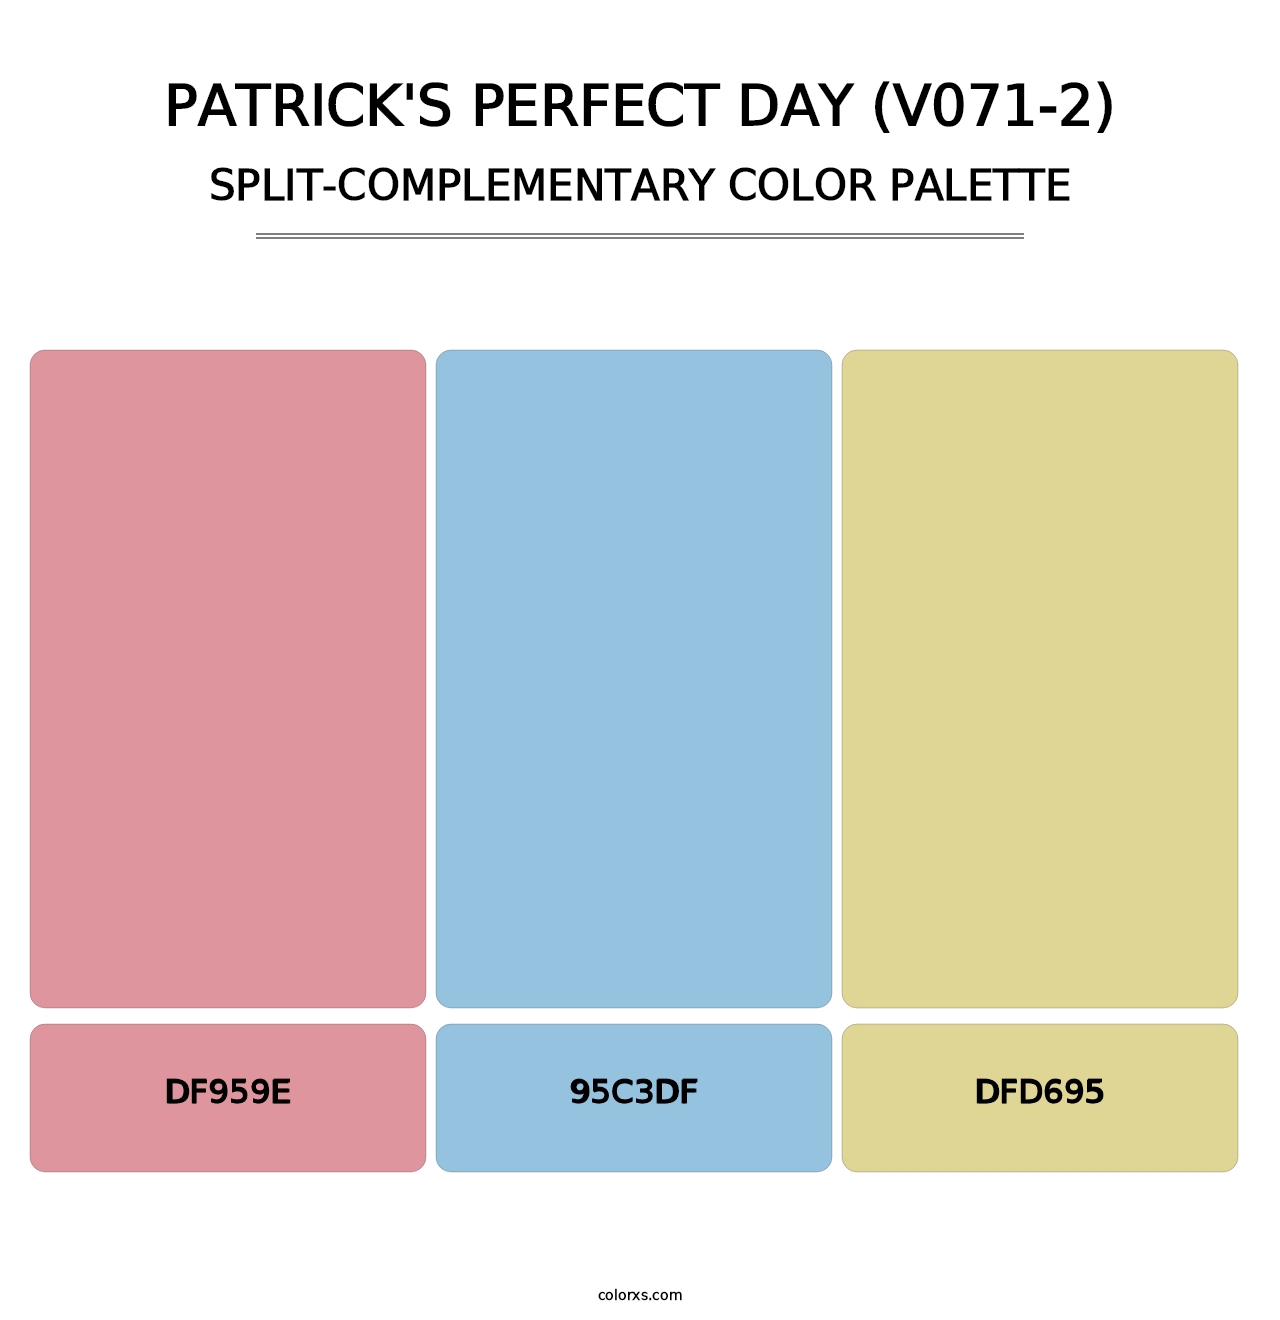 Patrick's Perfect Day (V071-2) - Split-Complementary Color Palette